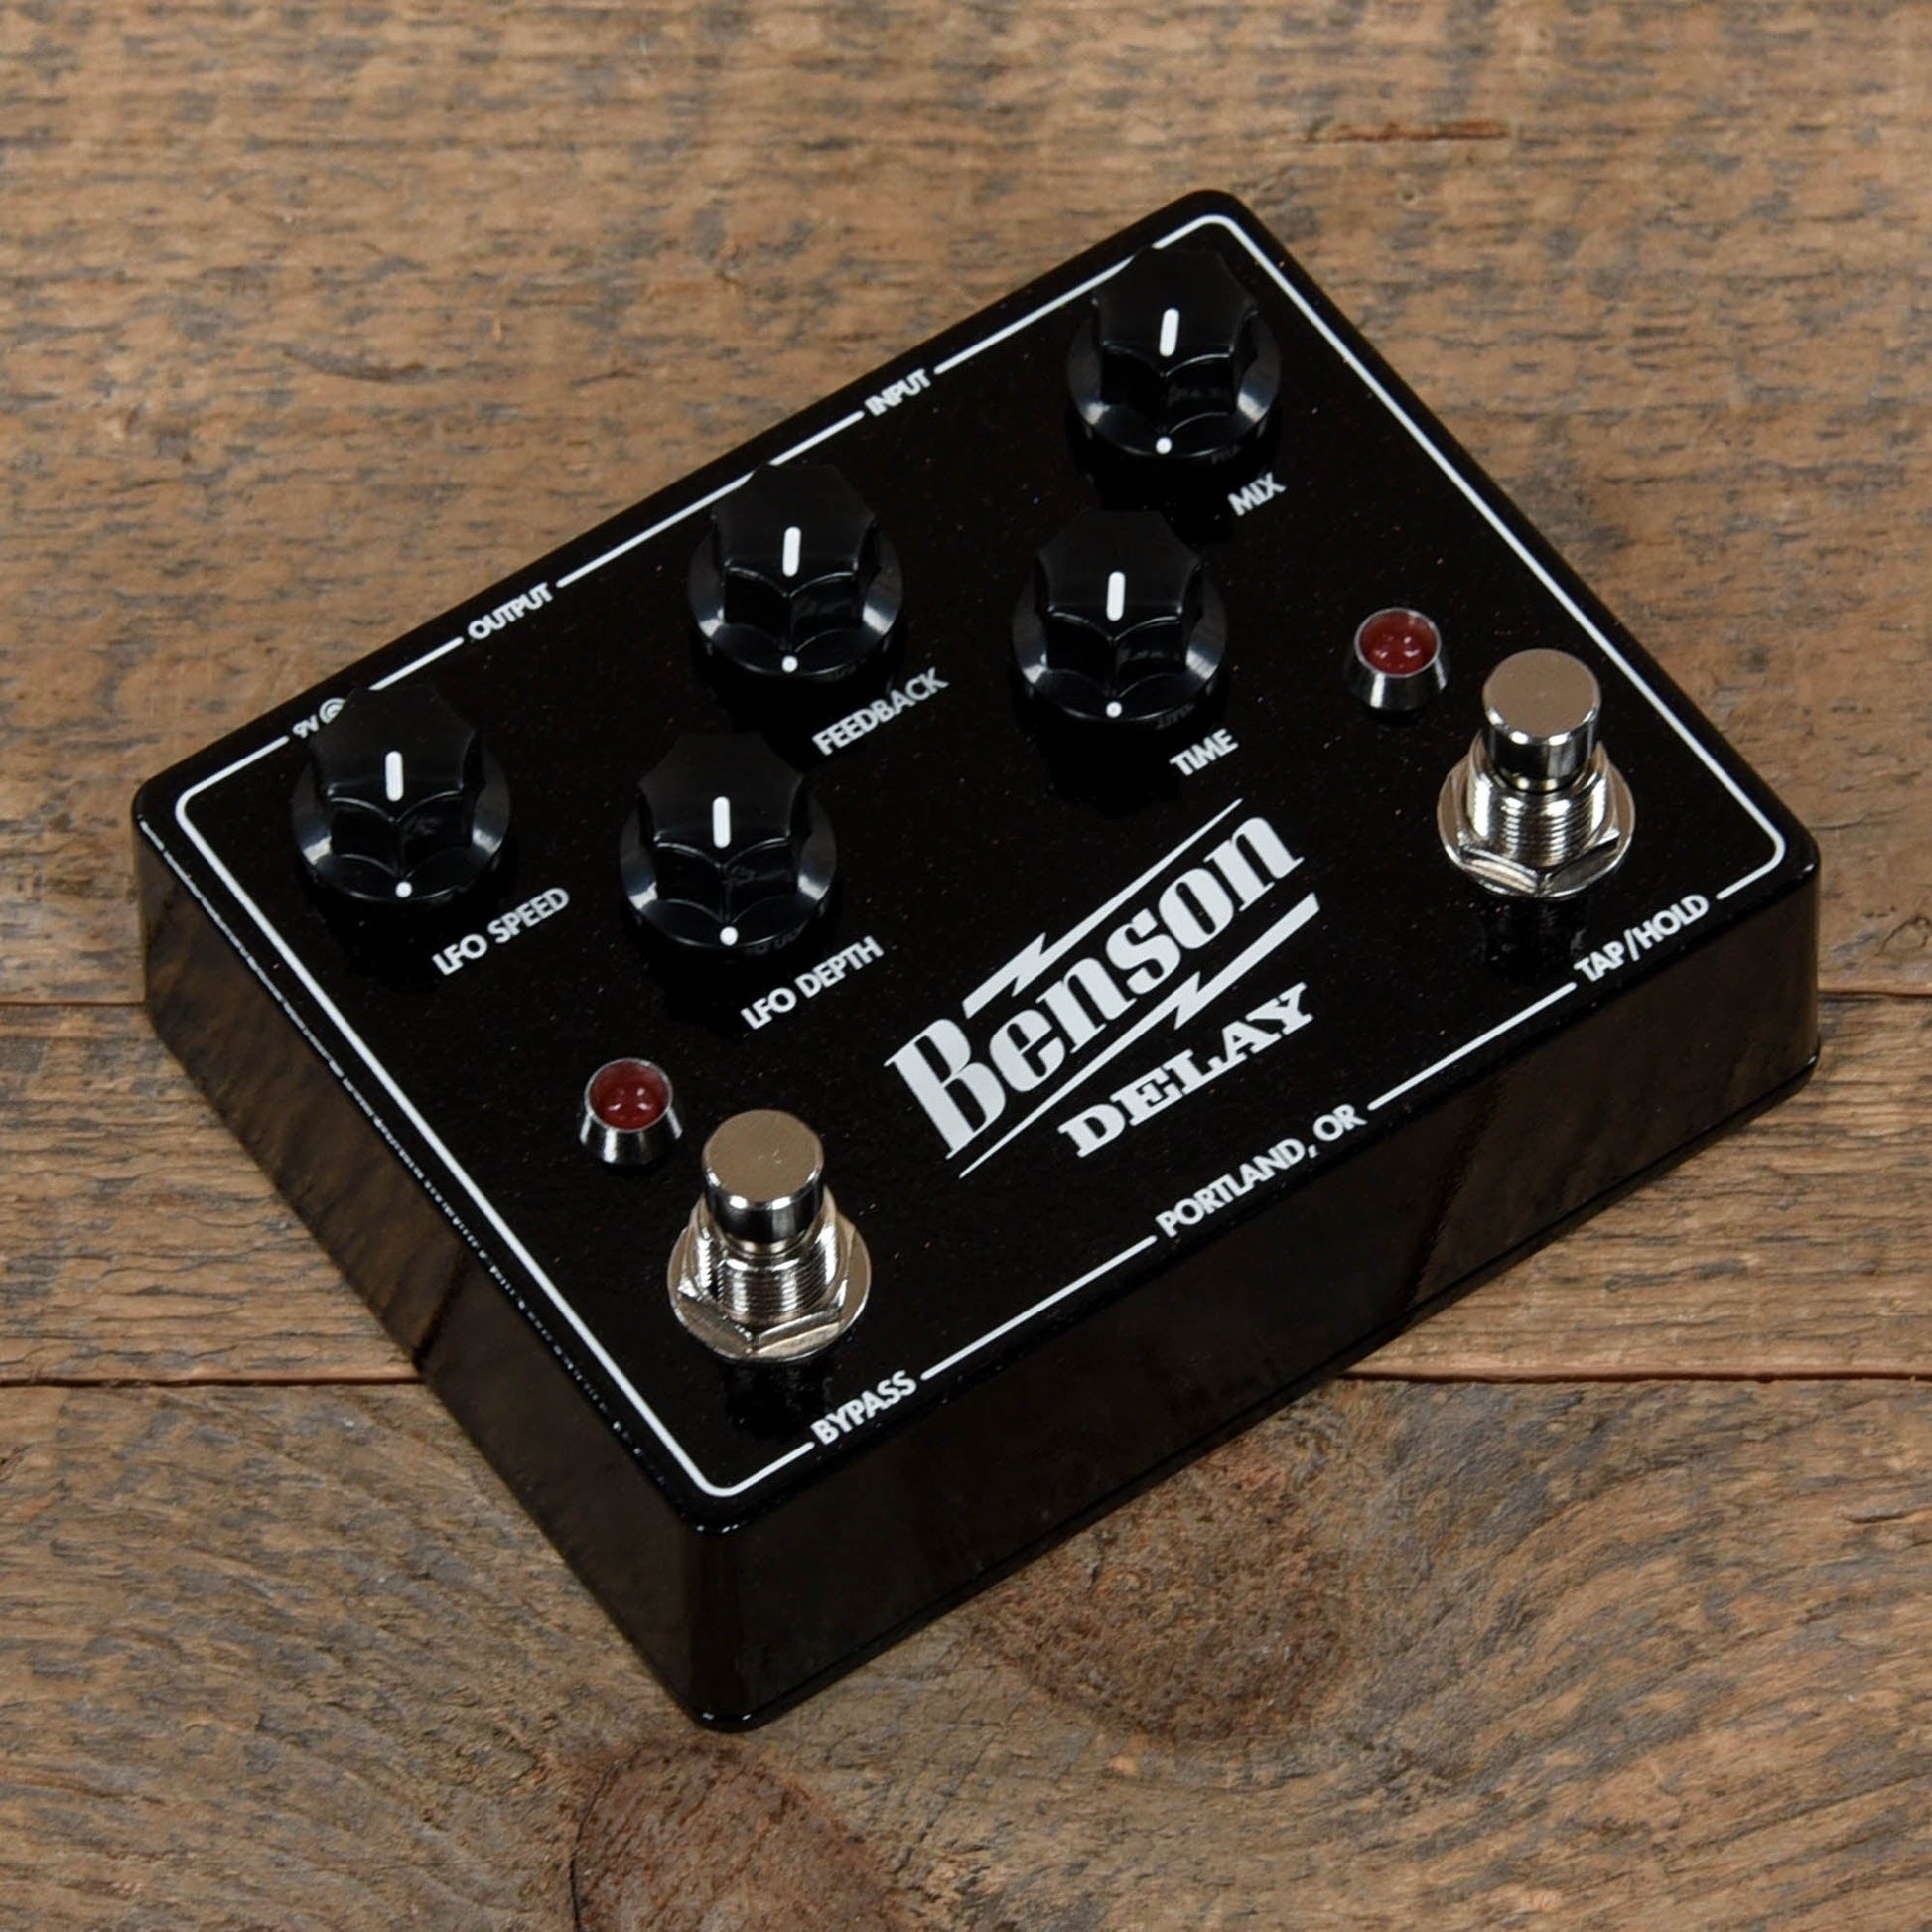 Benson Amps Delay Pedal Effects and Pedals / Delay